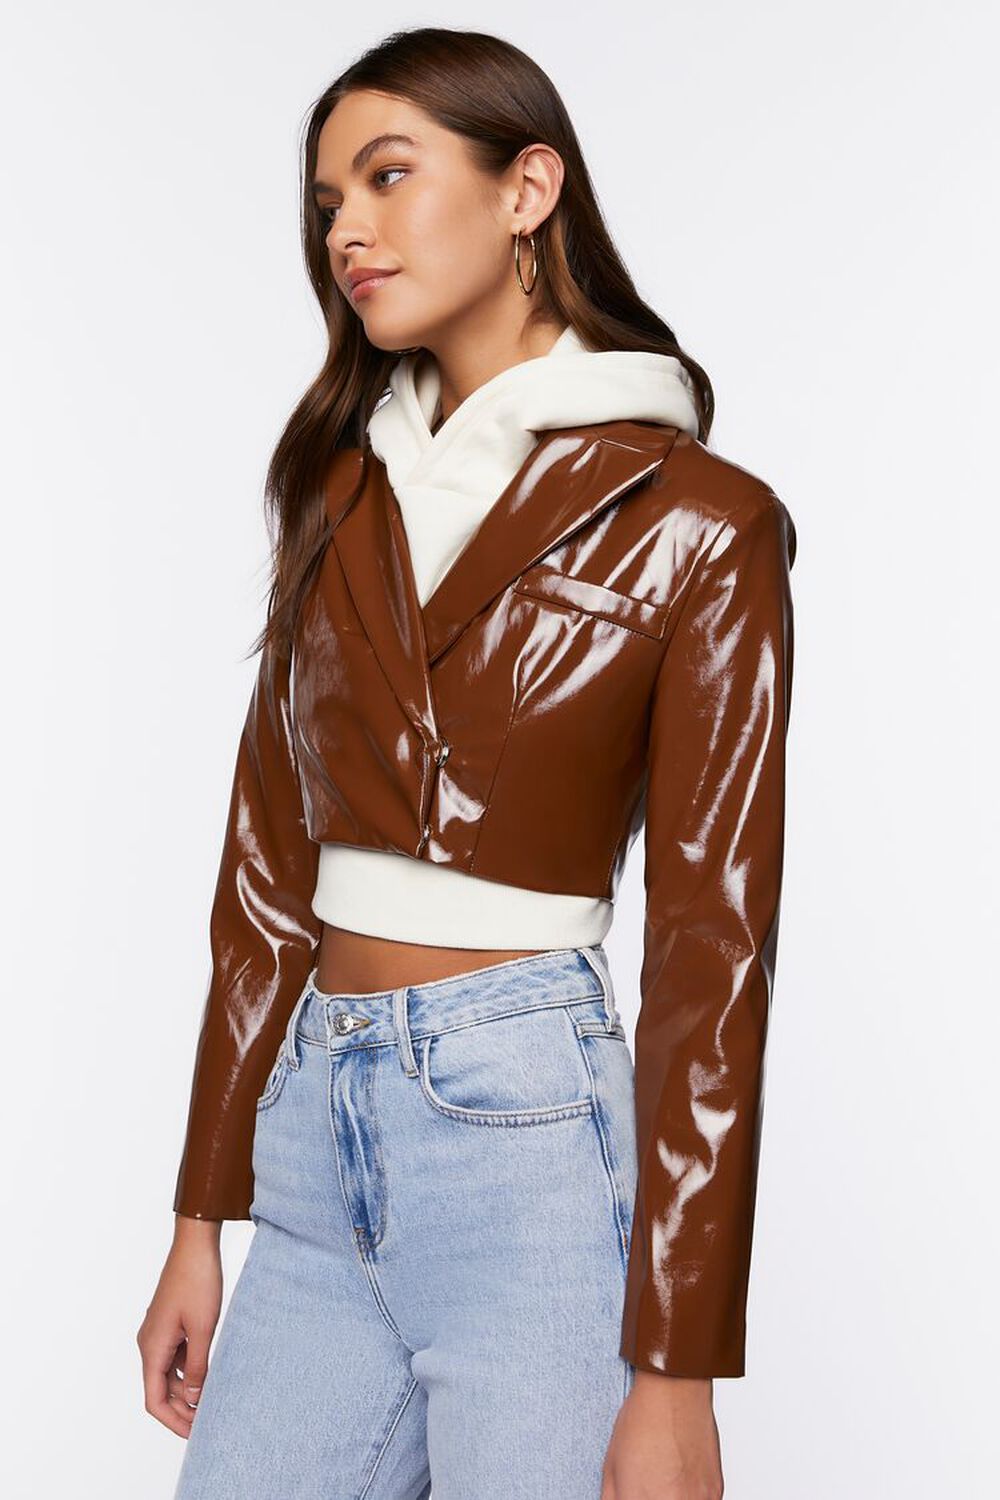 BROWN Faux Patent Leather Cropped Blazer, image 2